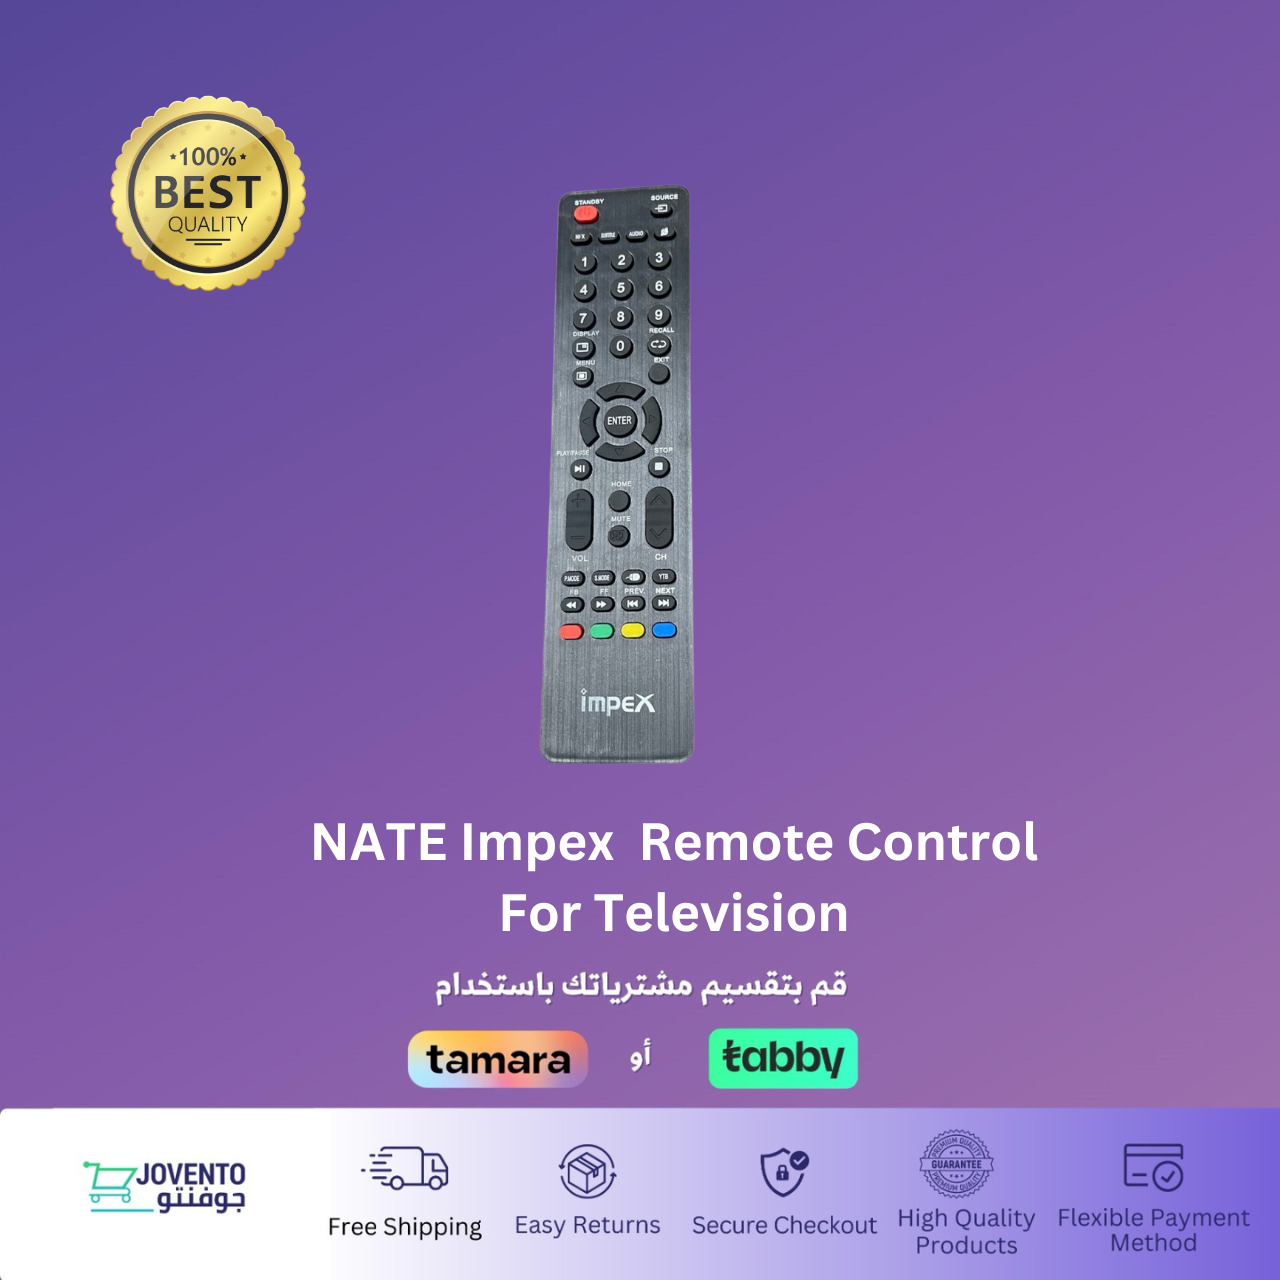 NATE Impex  Remote Control For Television